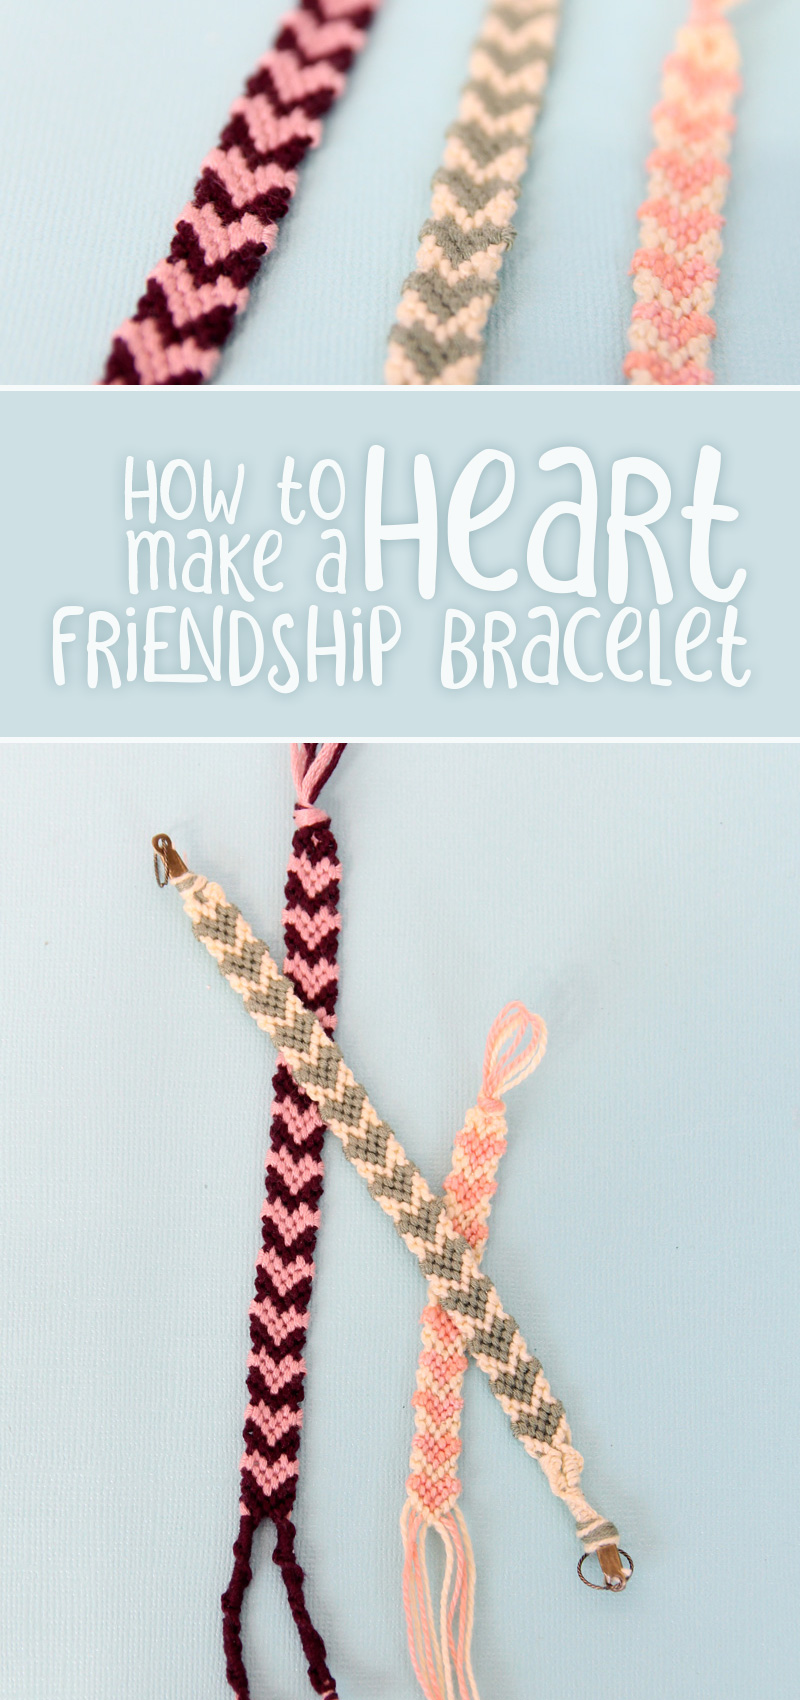 Heart patterned friendship bracelet hero collage with text and a light blue background